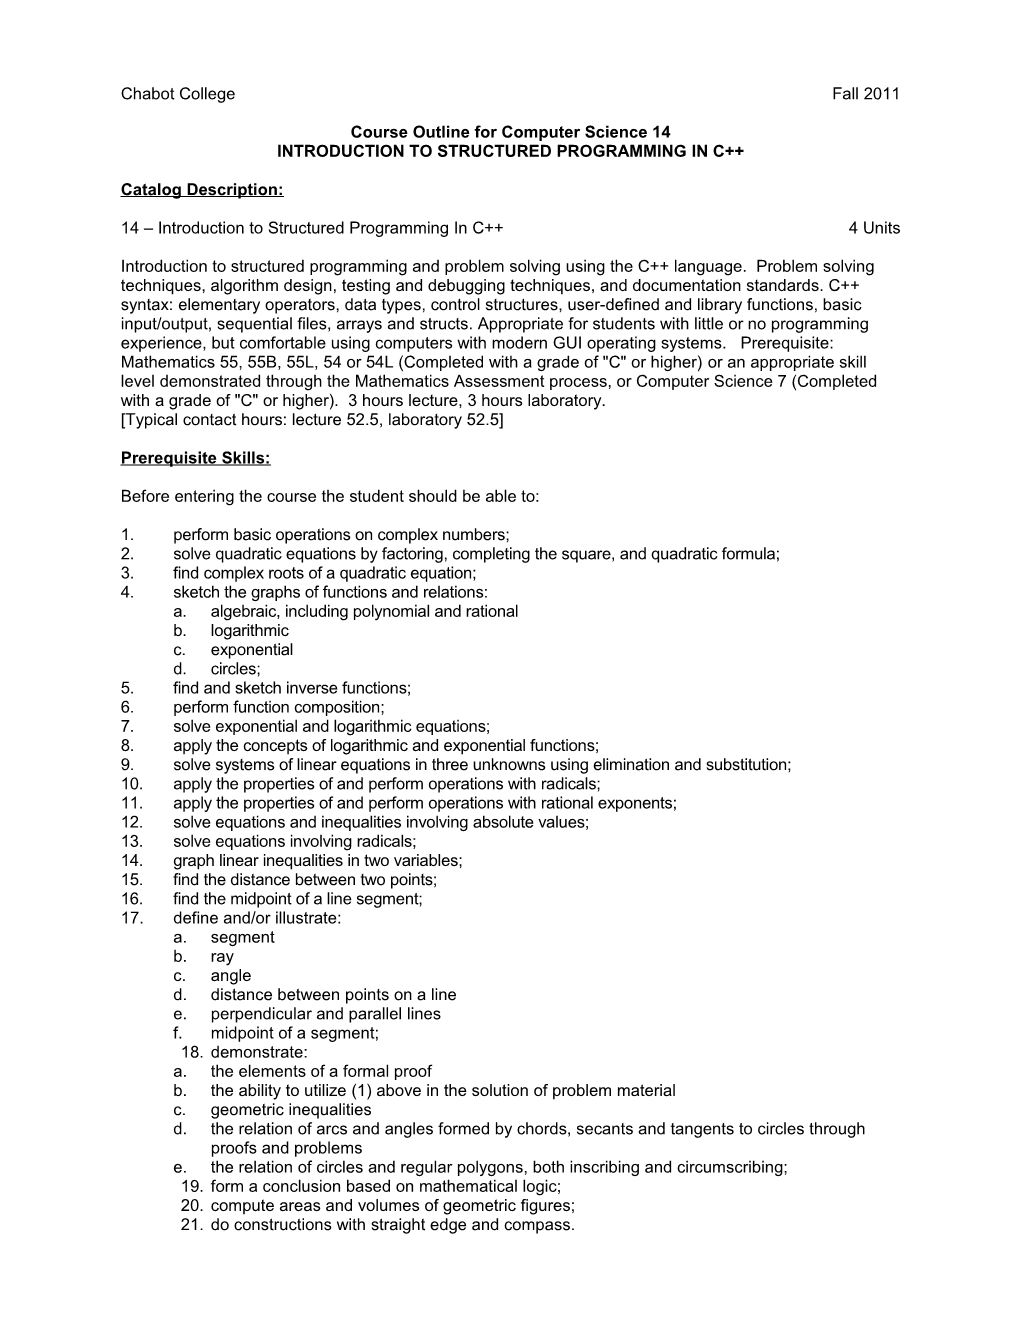 Course Outline for Computer Science 14, Page 4